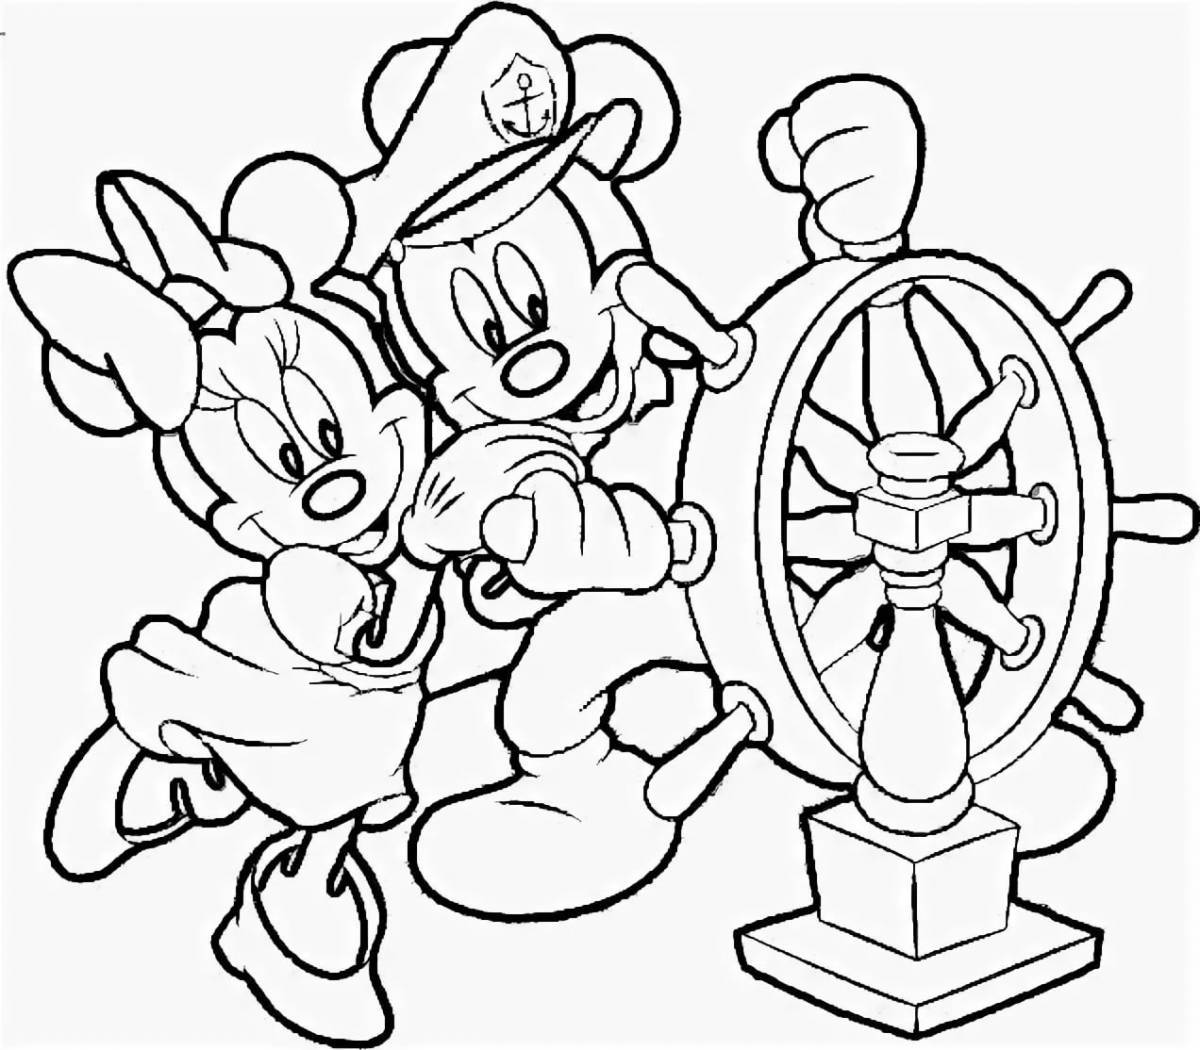 Coloring pages popular